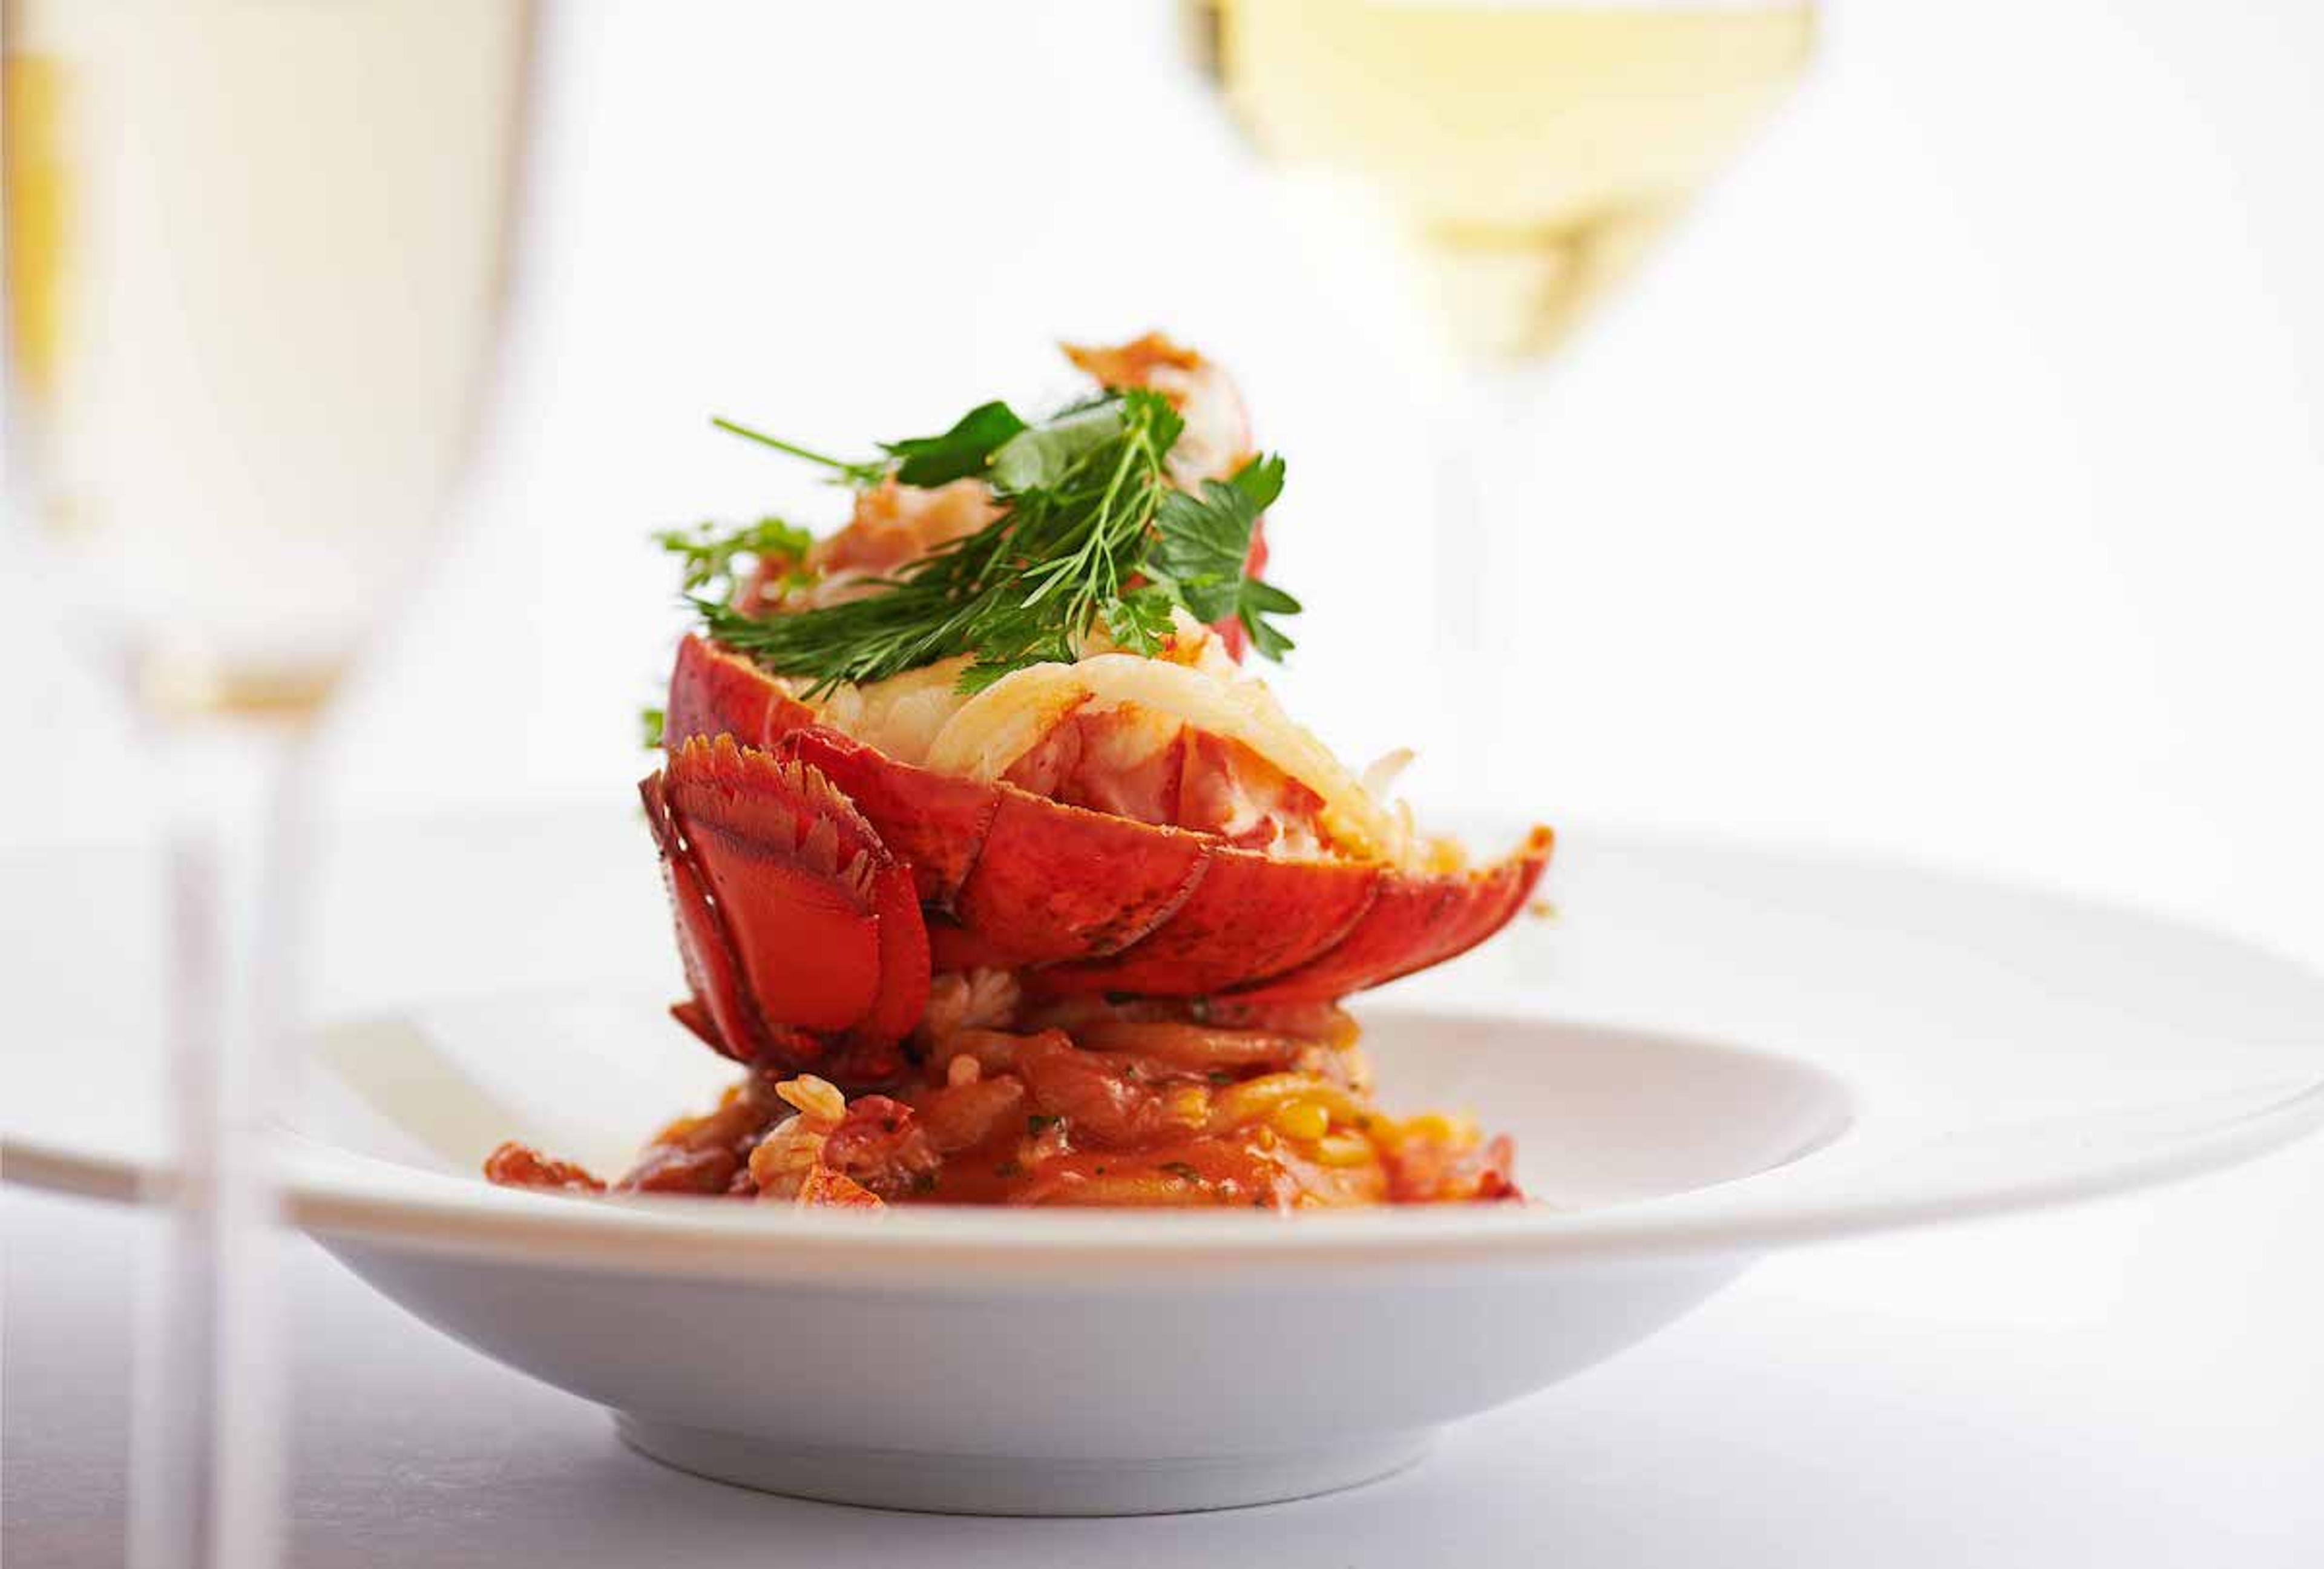 A white ceramic plate of pasta topped with lobster presented in its shell. The plate is photographed between two glasses of white wine.